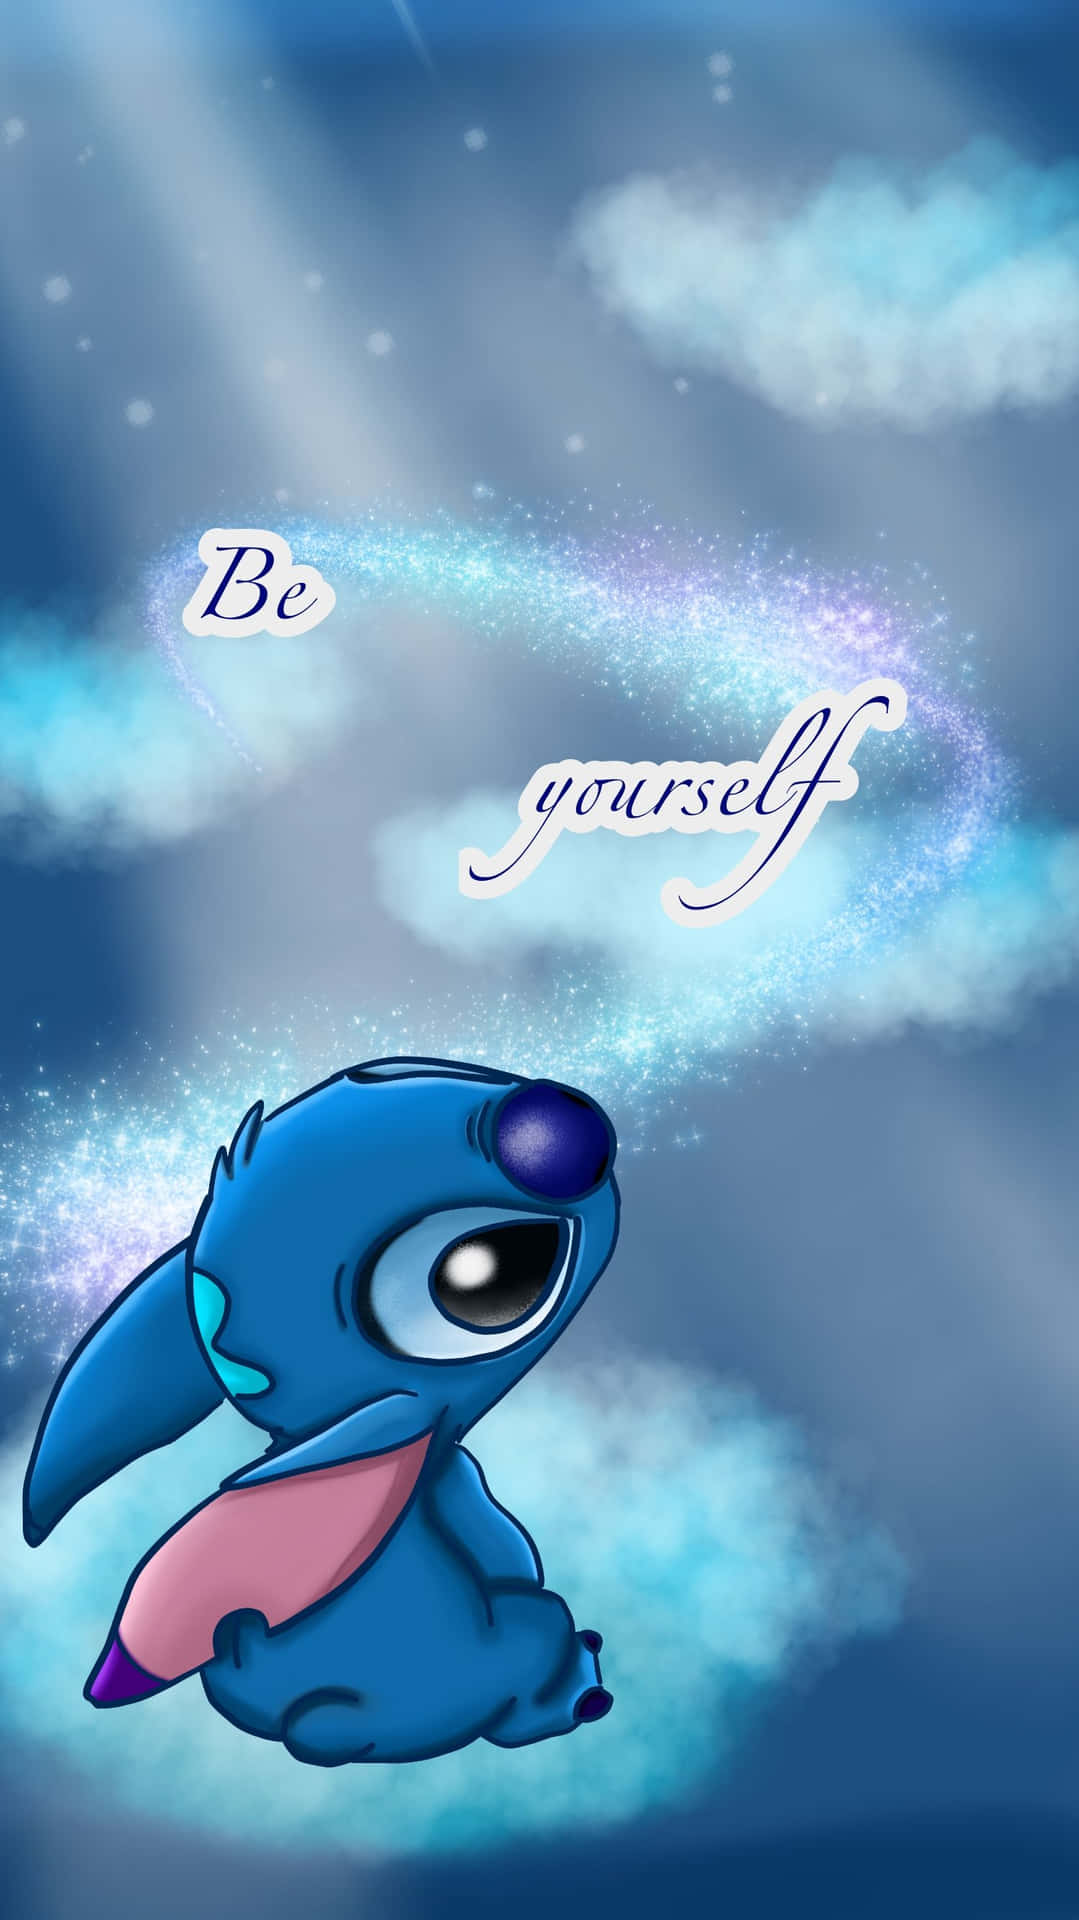 Download Stitch Wallpaper By Sassy Sassy Wallpaper | Wallpapers.com